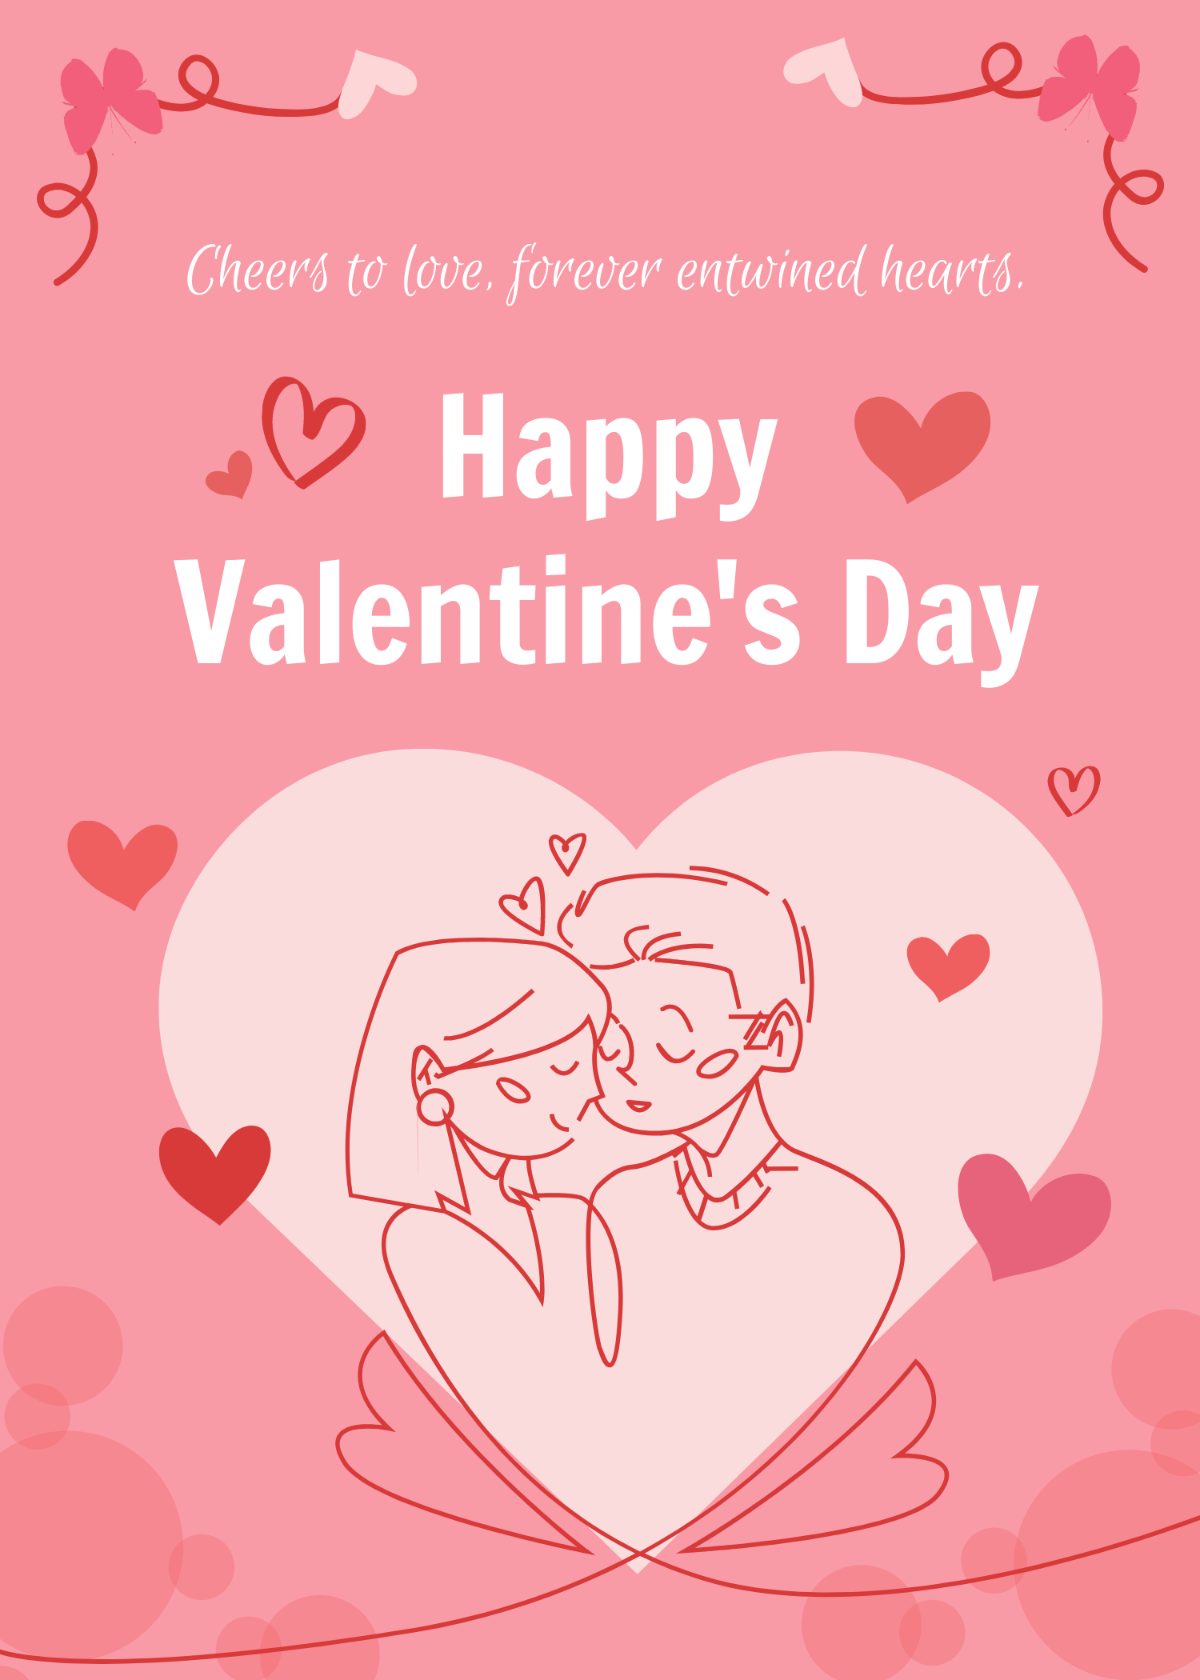 Greeting Cards for Valentine's Day Template